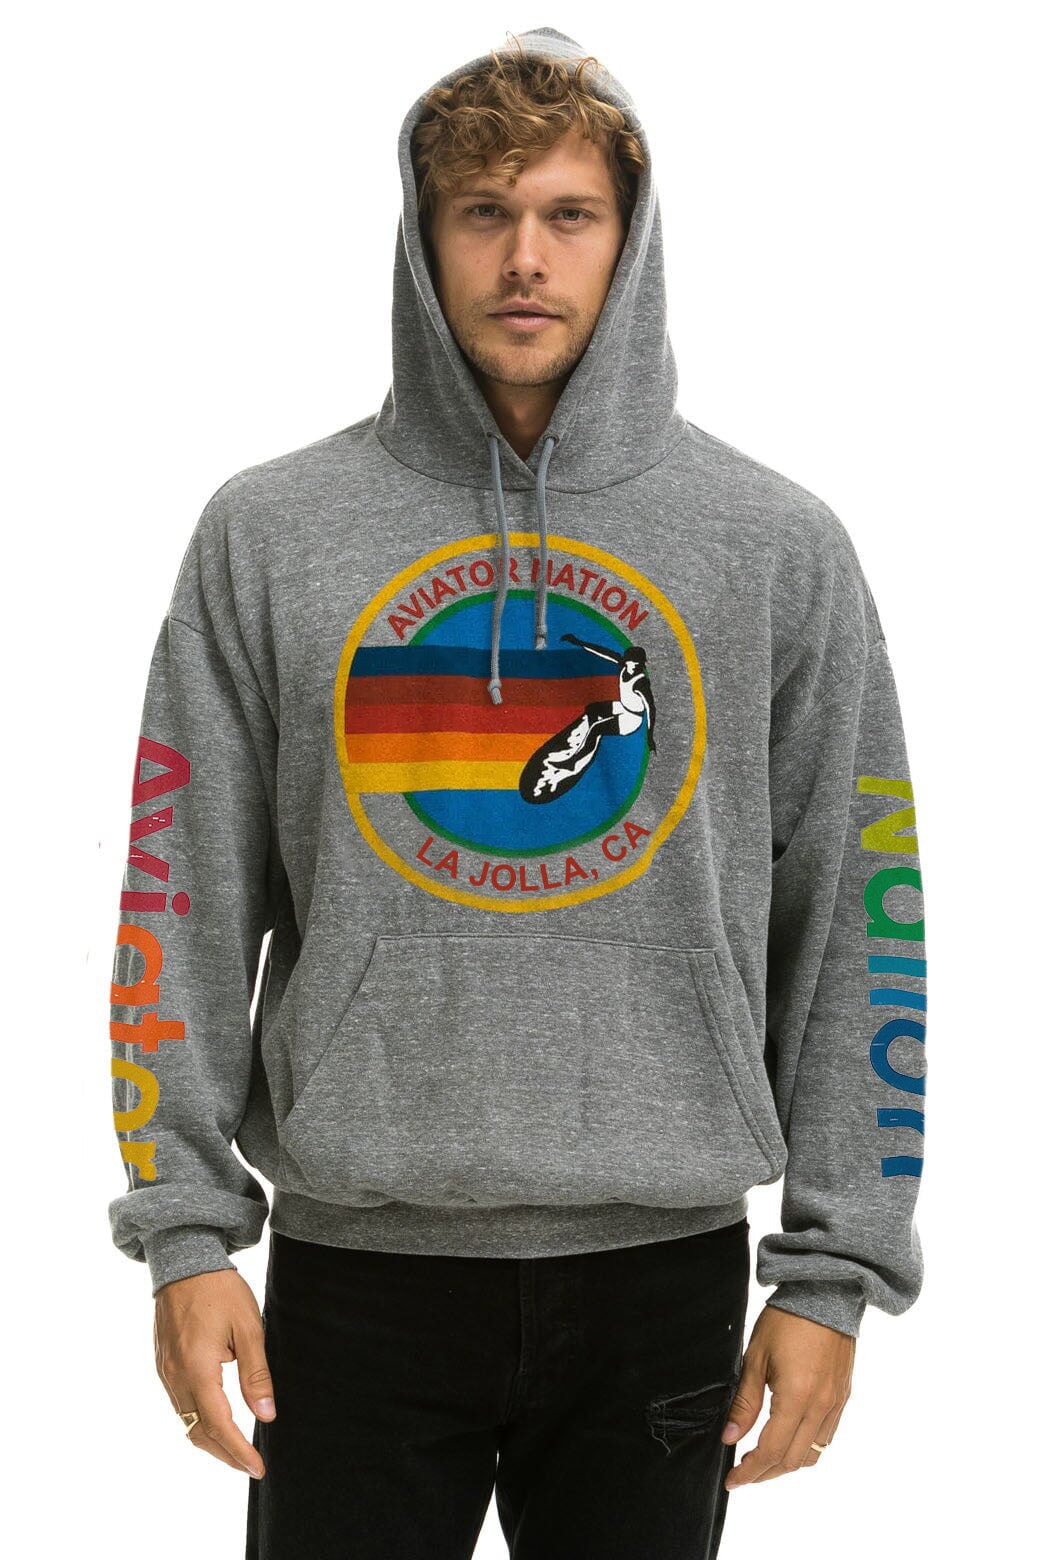 AVIATOR NATION LA JOLLA RELAXED PULLOVER HOODIE Hoodie Aviator Nation 